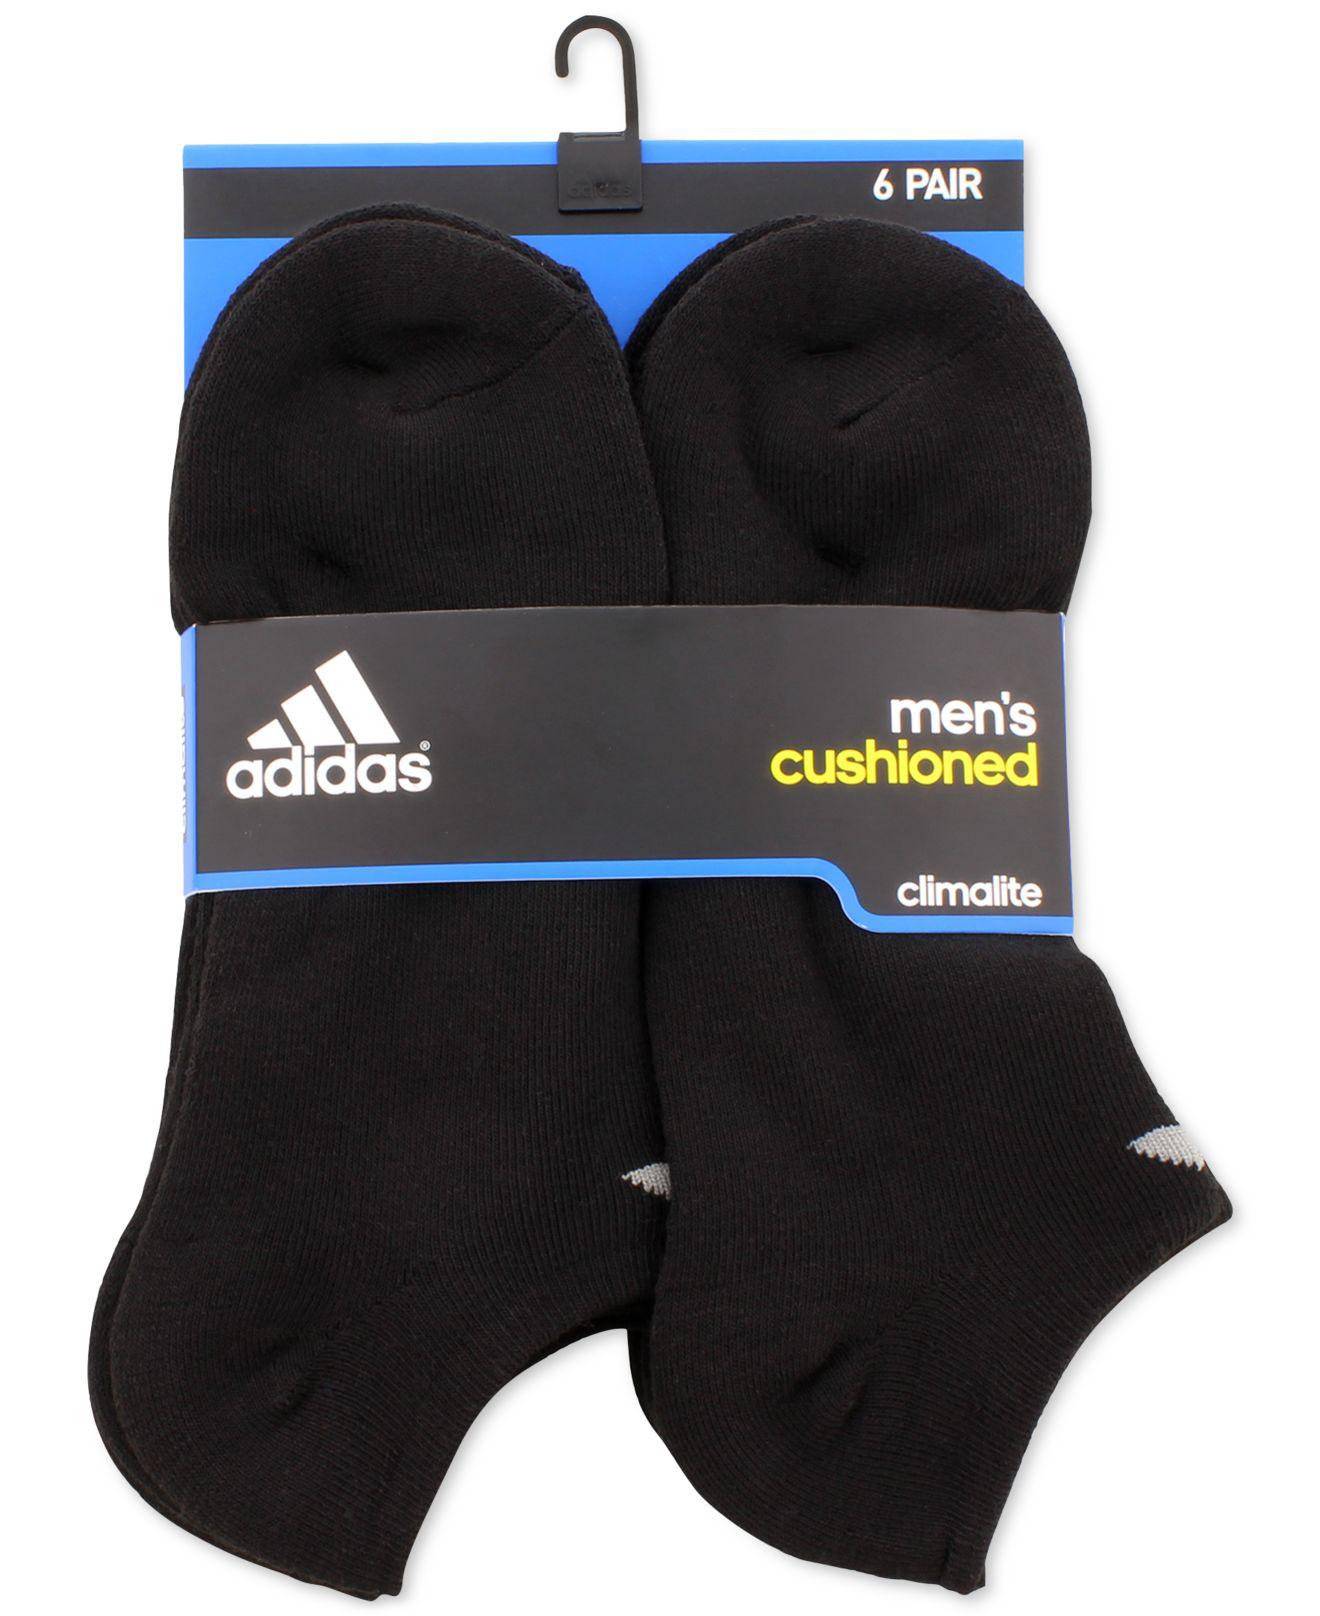 Lyst - adidas Men's Performance Athletic No-show Socks 6-pack in Black ...